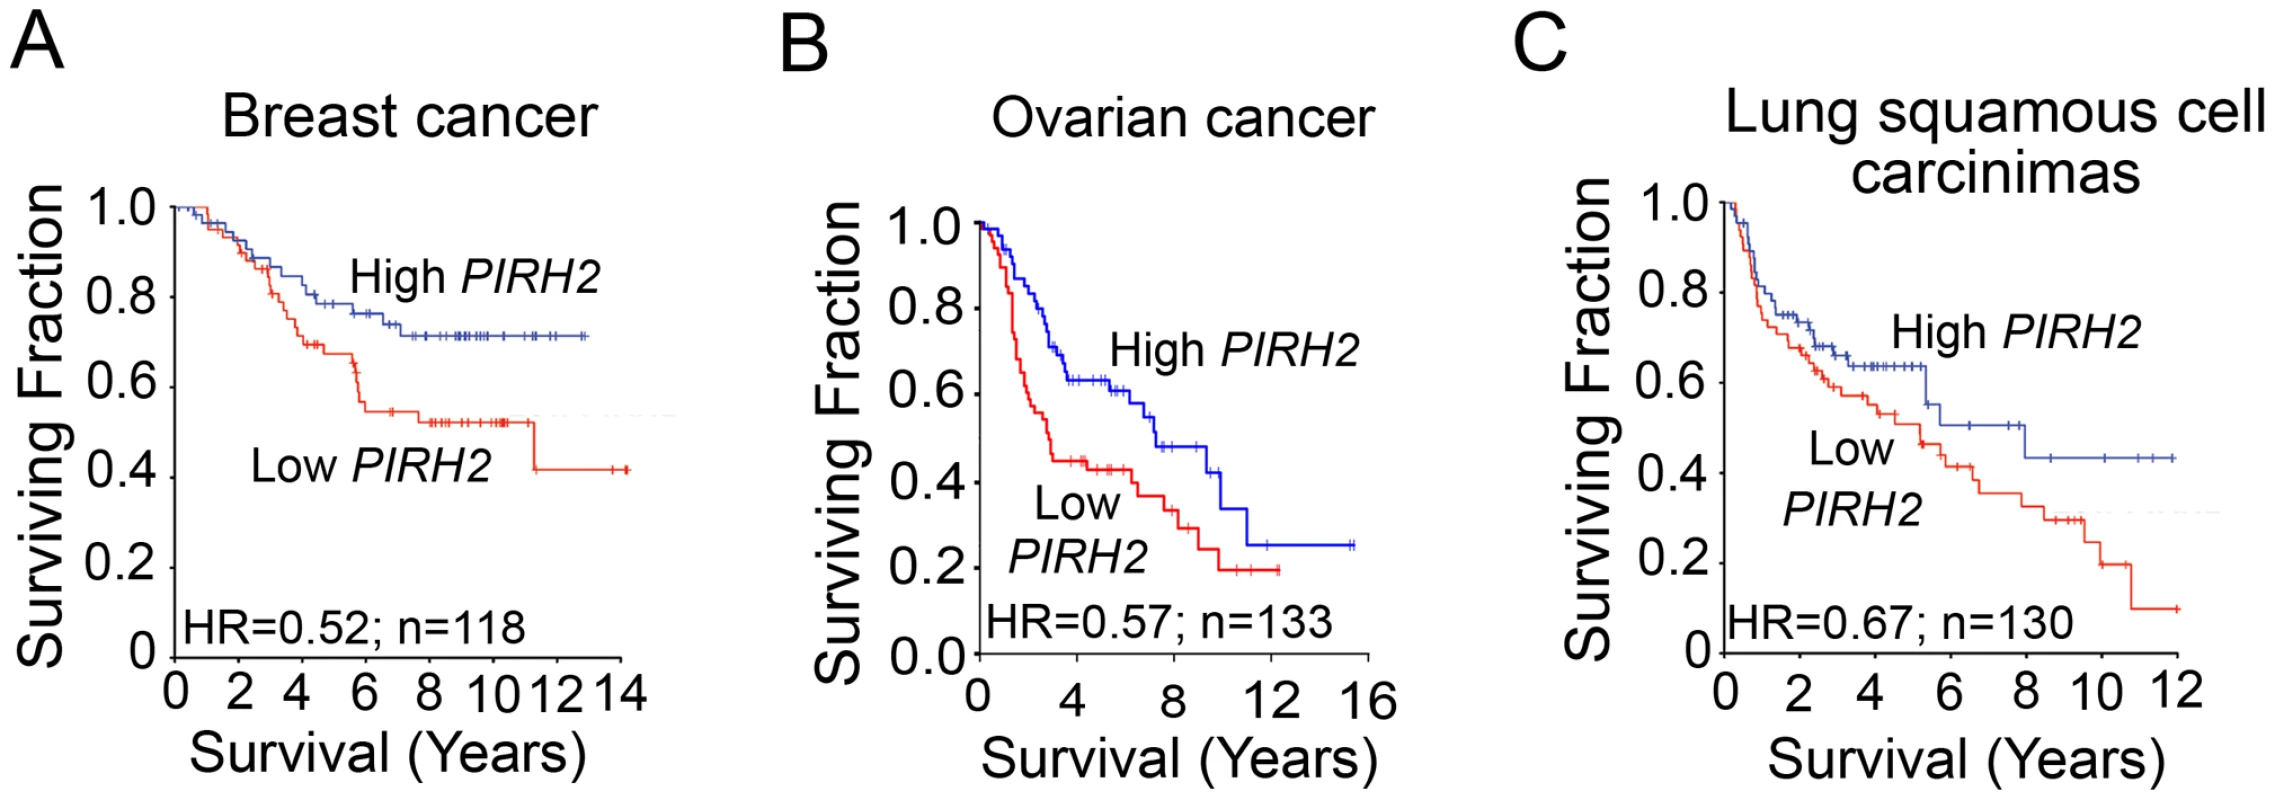 Downregulation of PIRH2 Associates with Short-Term Survival of Patients with Breast Cancer, Ovarian Cancer, or Squamous Cell Carcinomas of the Lung.